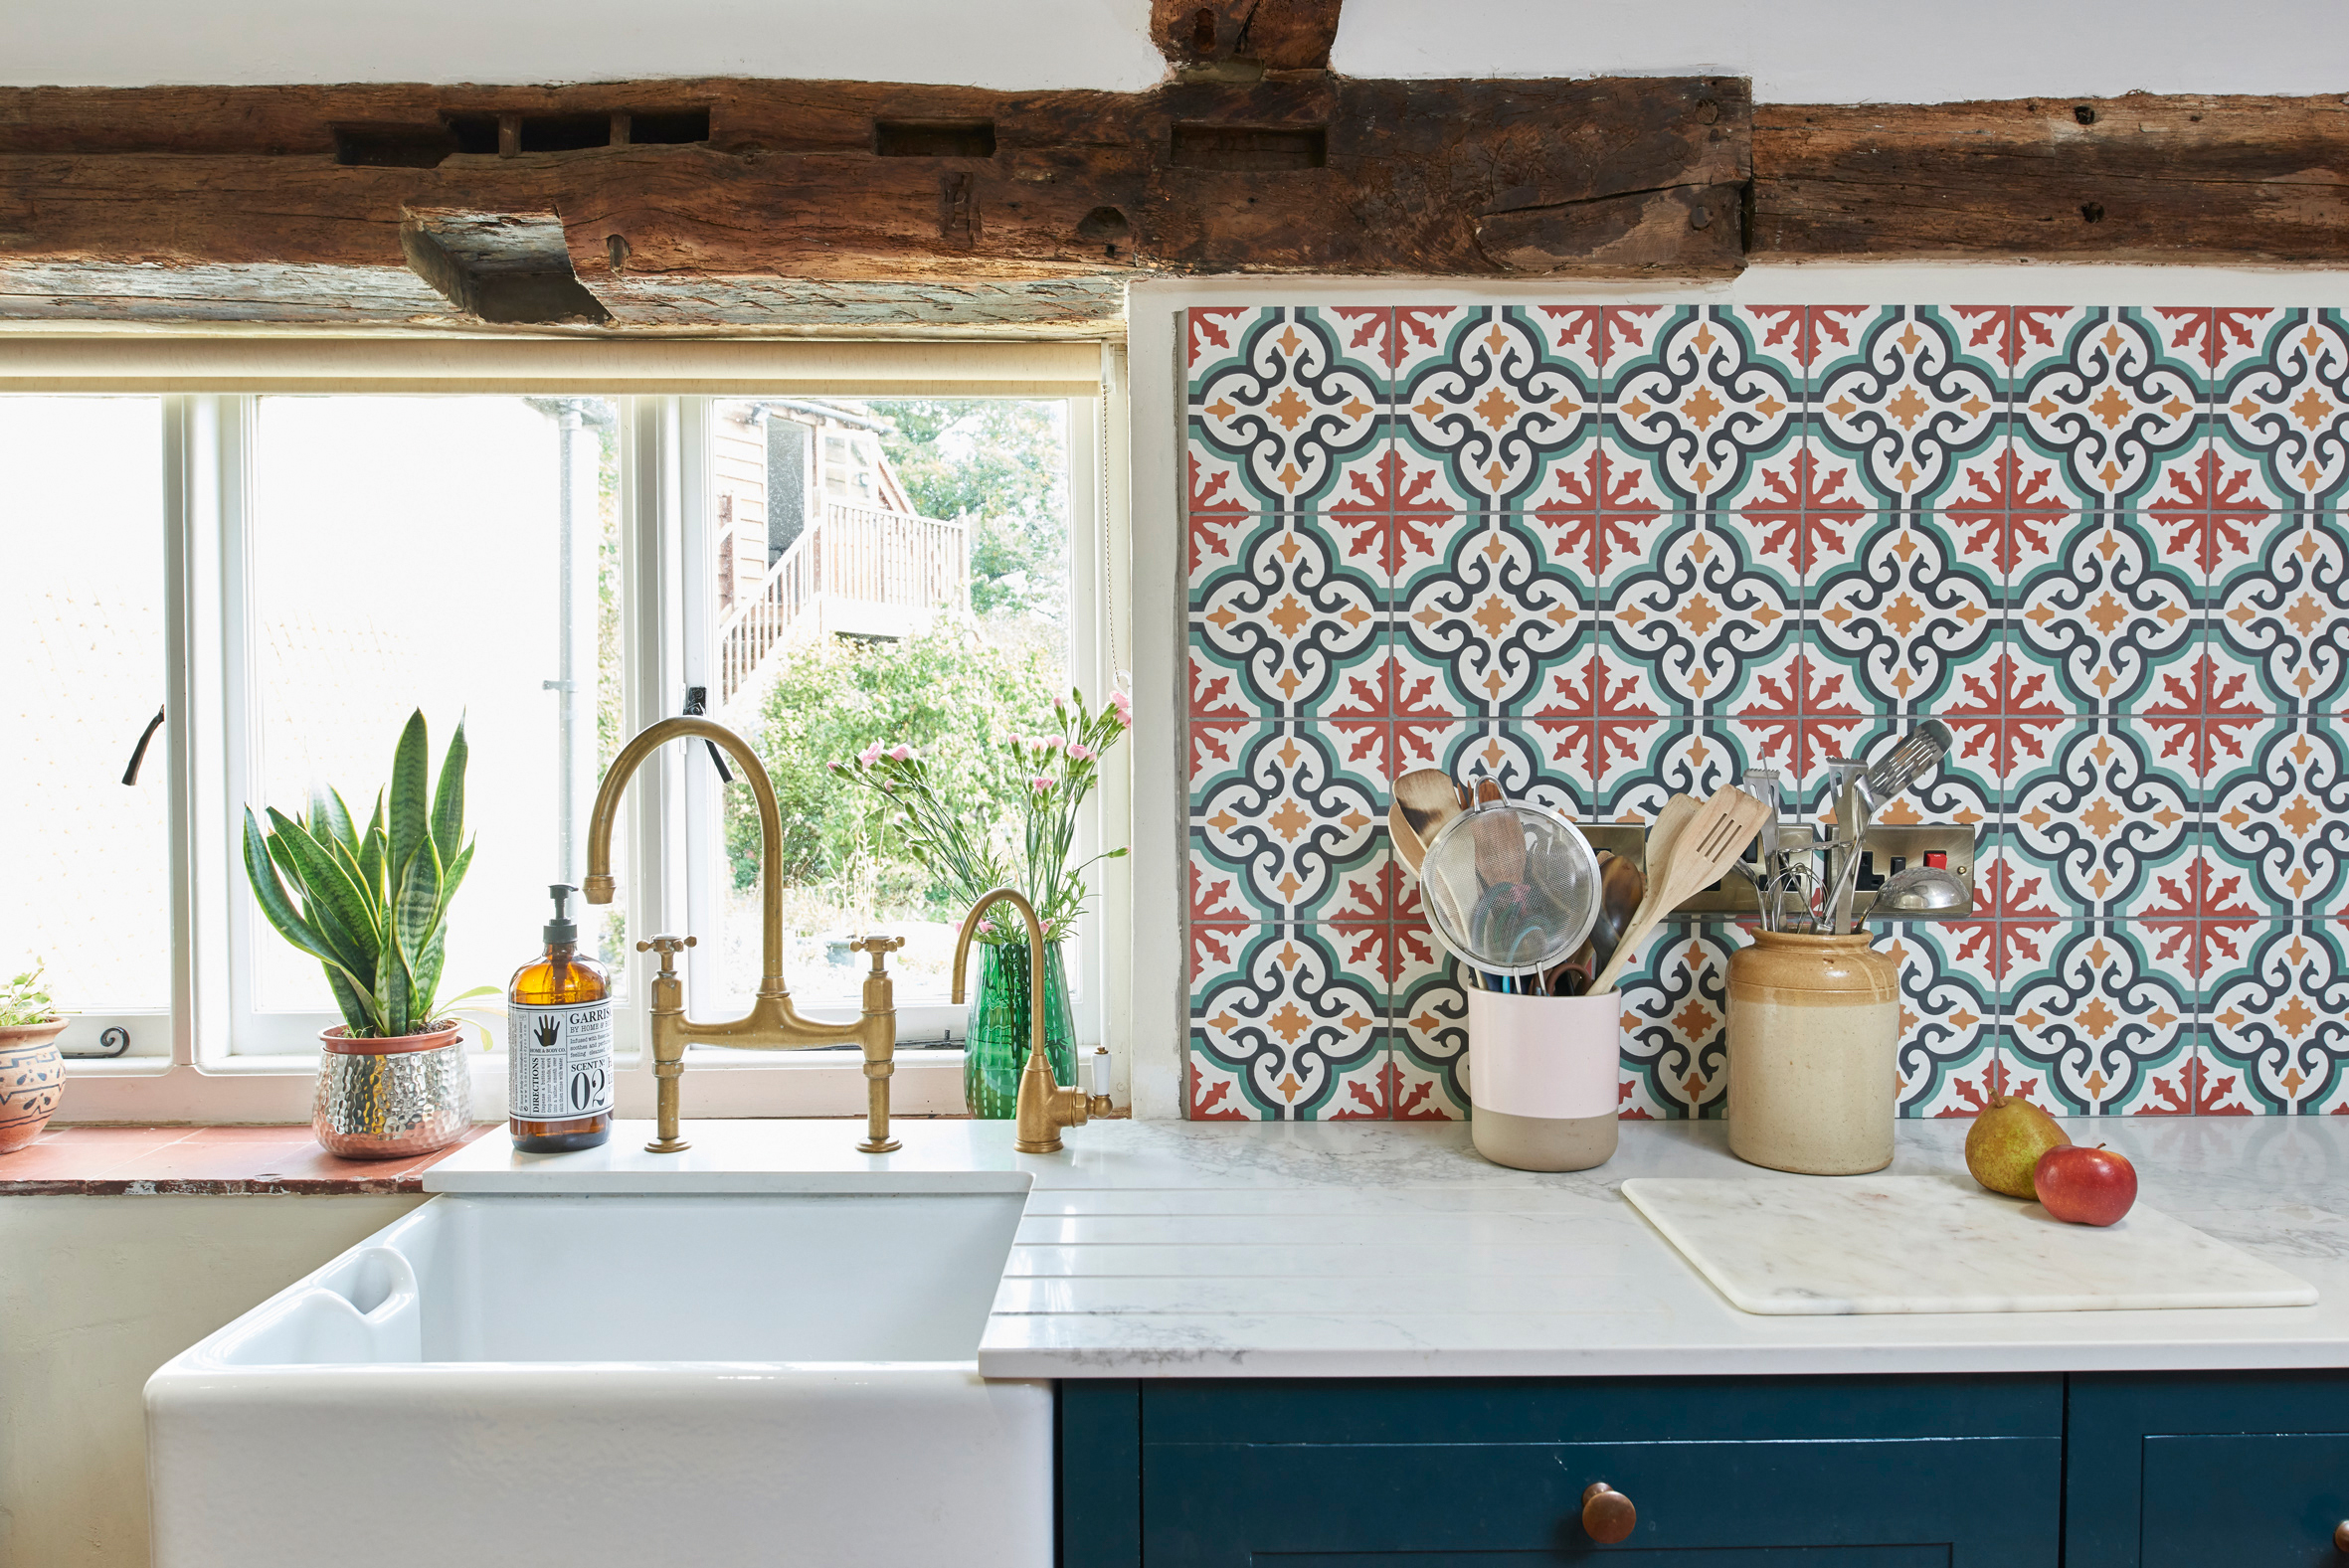 tile patterns: 15 smart designs to add style to every room | real